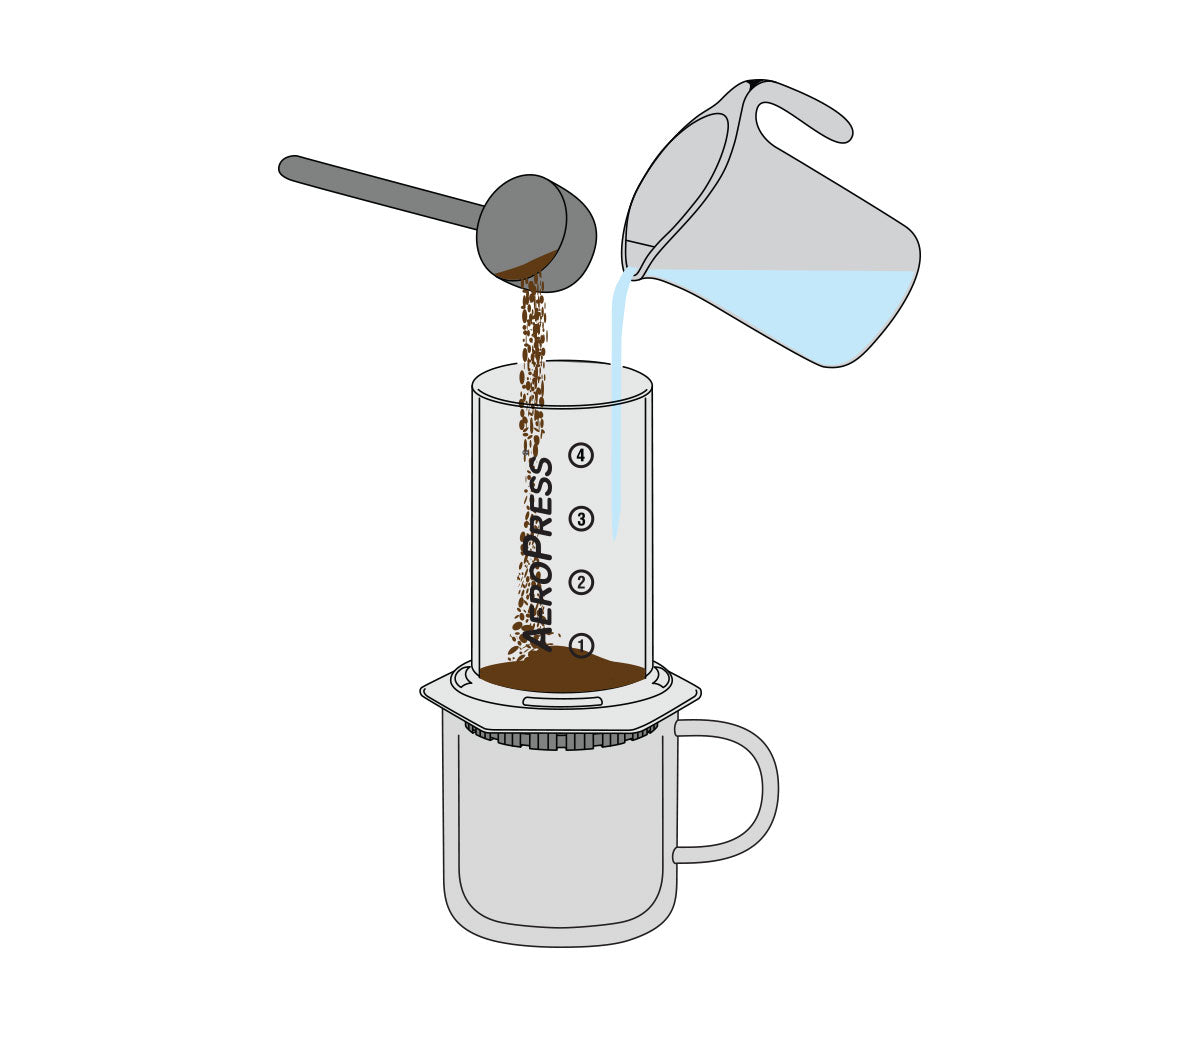 Diagram of adding coffee grounds and water to AeroPress chamber